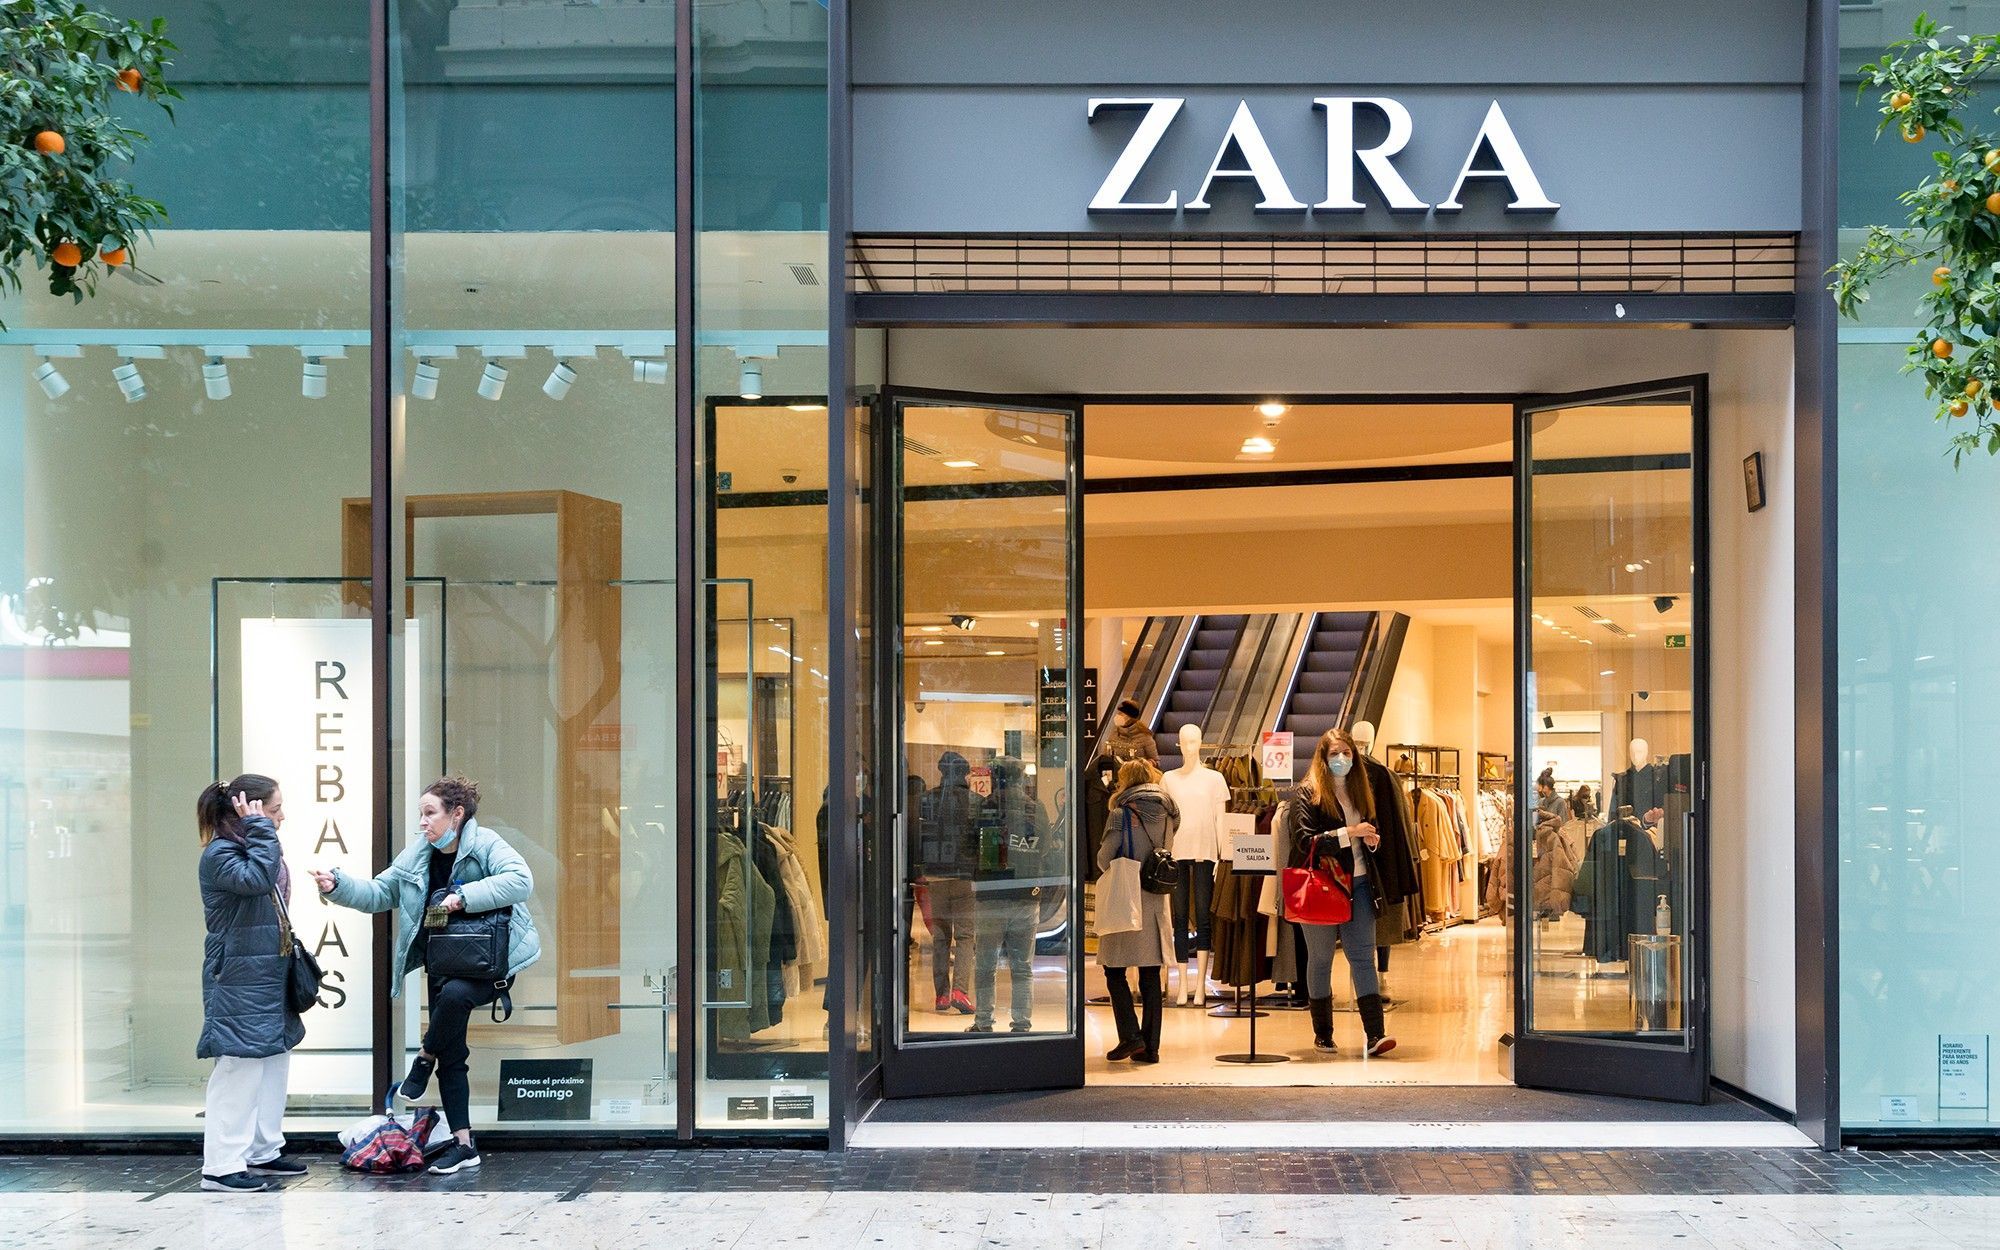 Zara will repair customers' used clothes